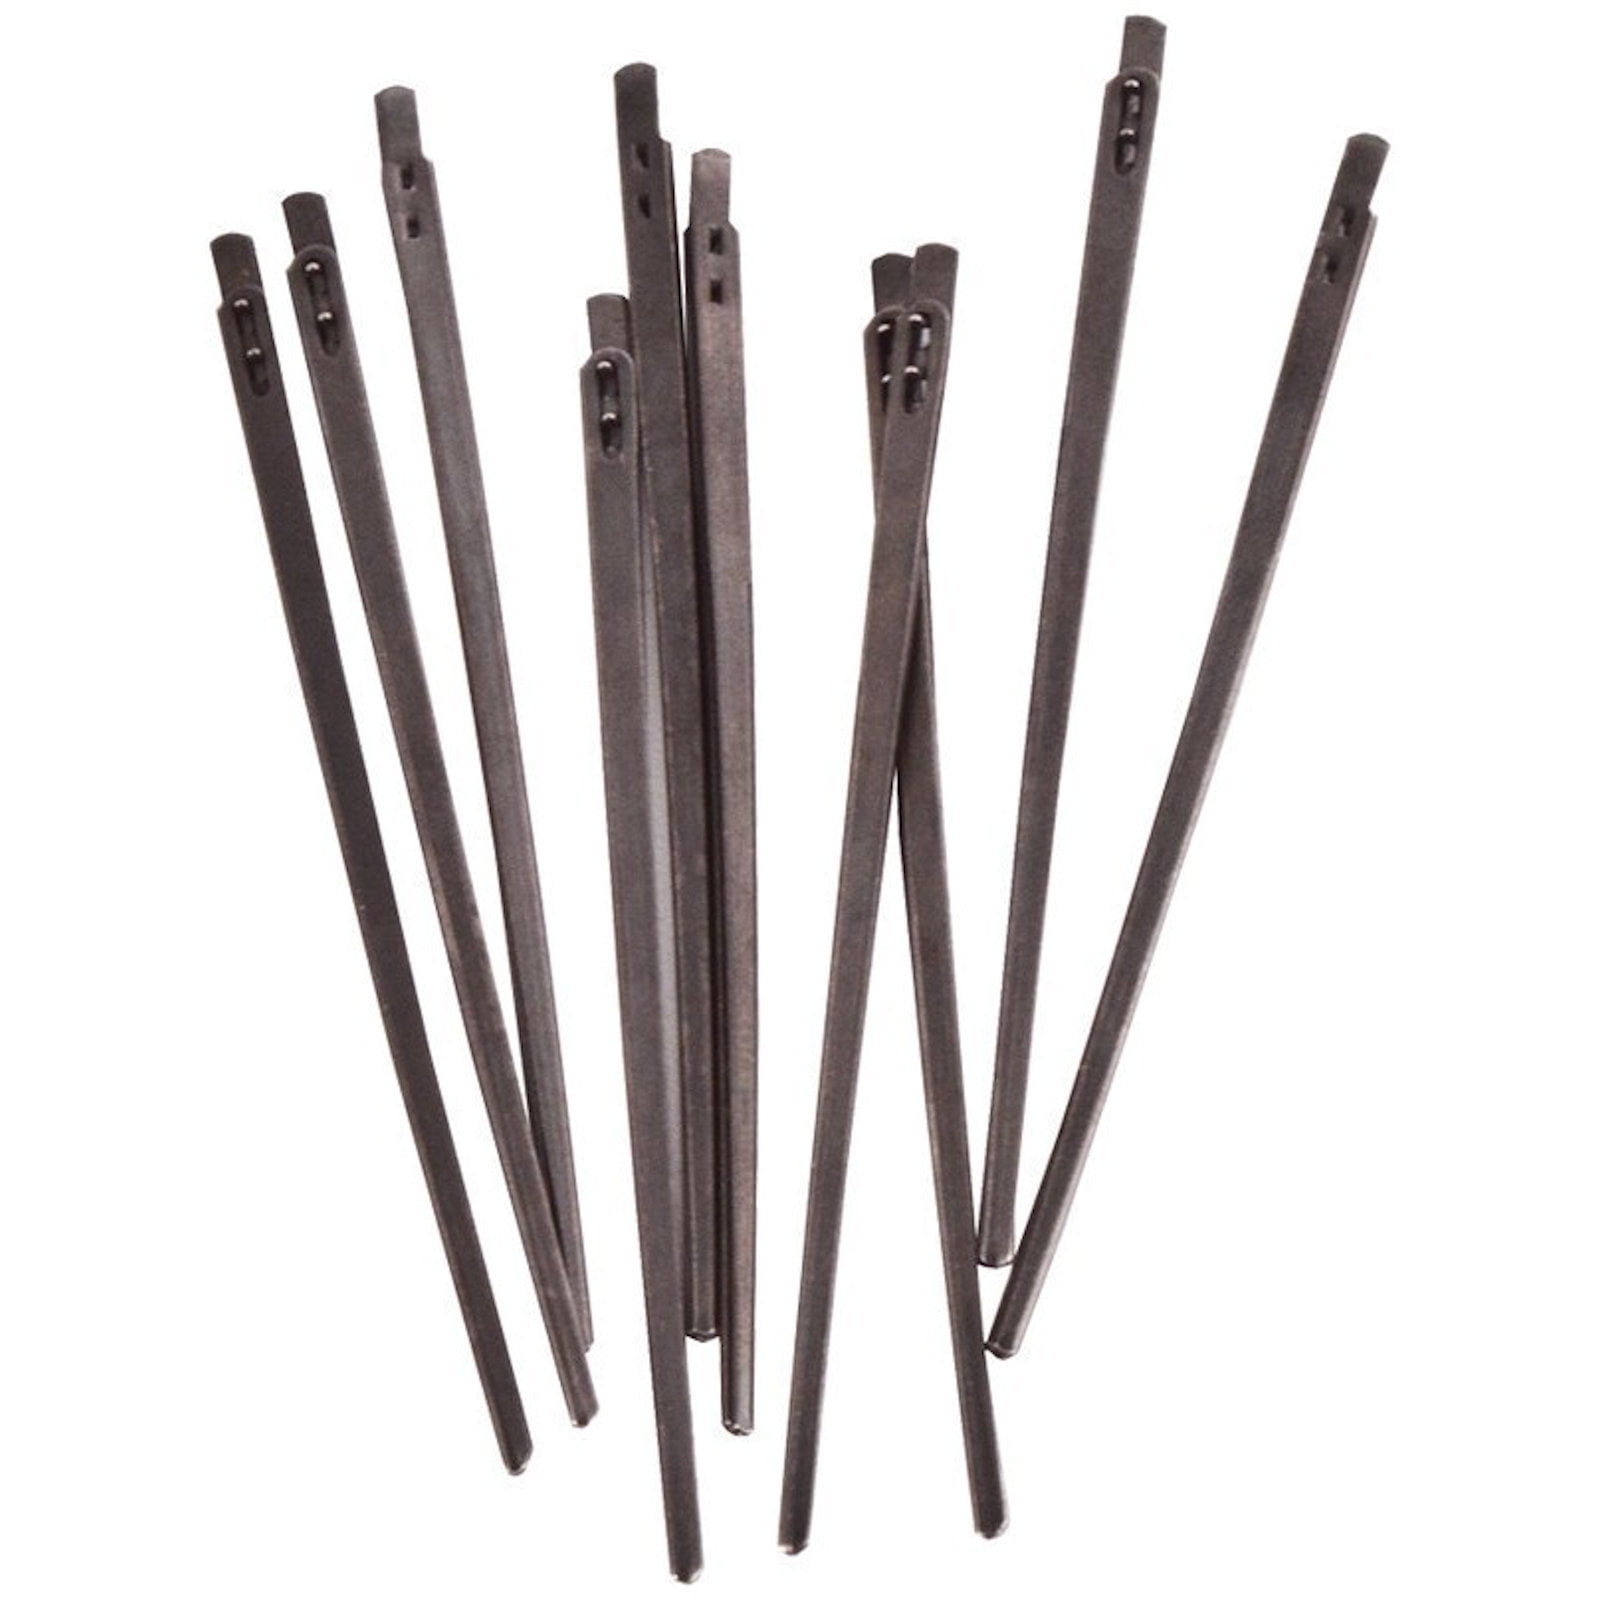 Tandy Leather 2-Prong Lacing Needle 10 Pack 1190-00 